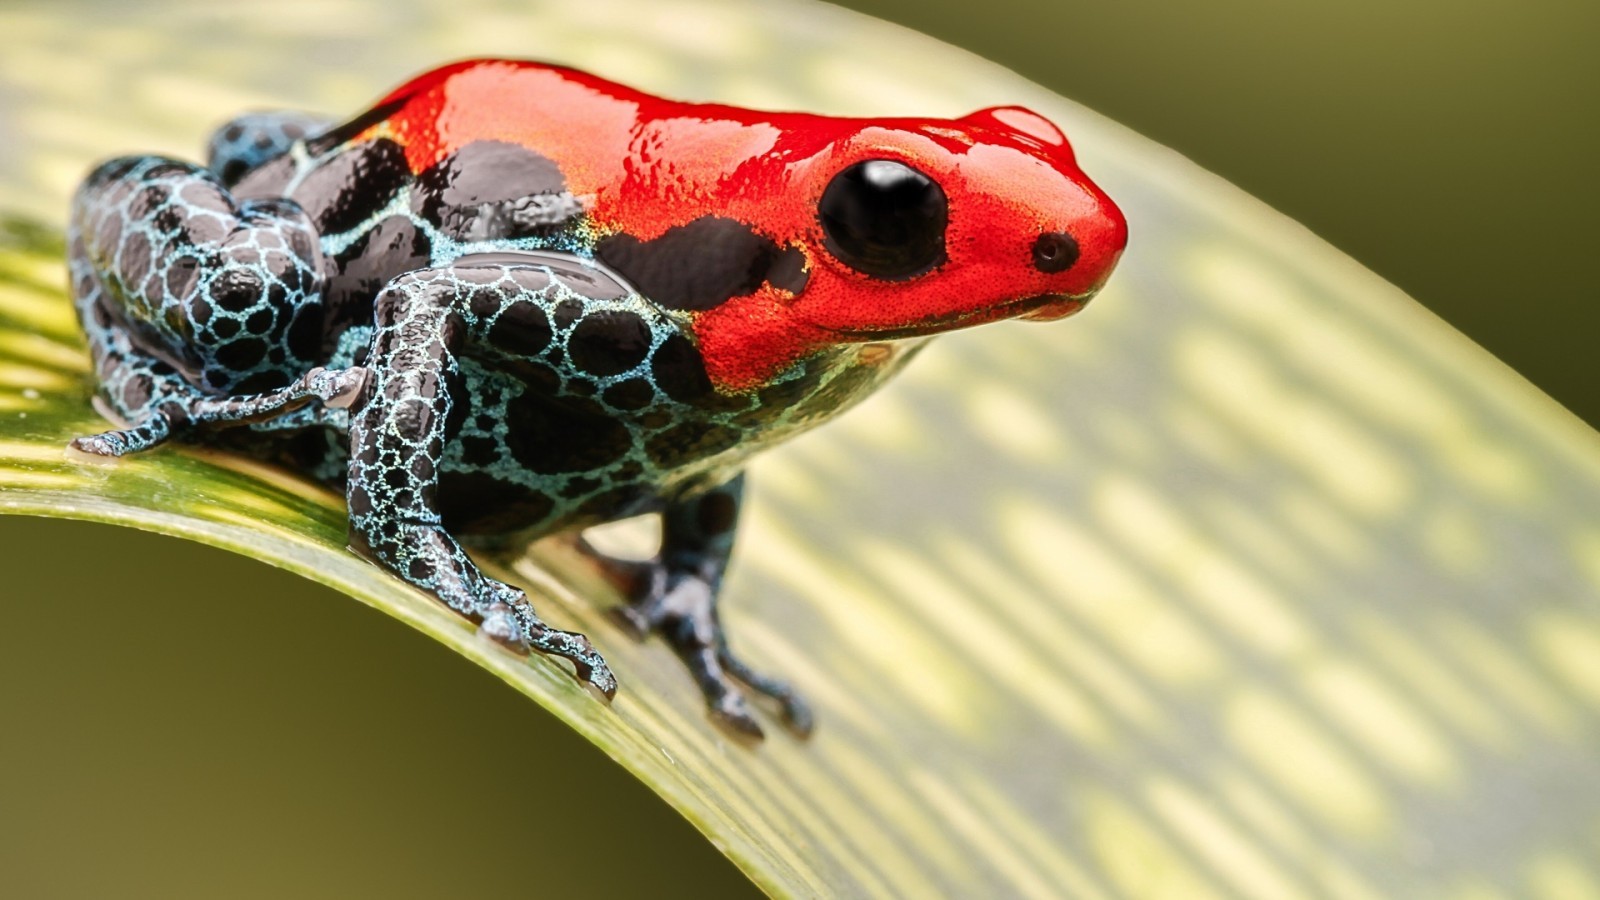 162 1622118 Poison Dart Frog Red Close Up Jumping Poisonous 